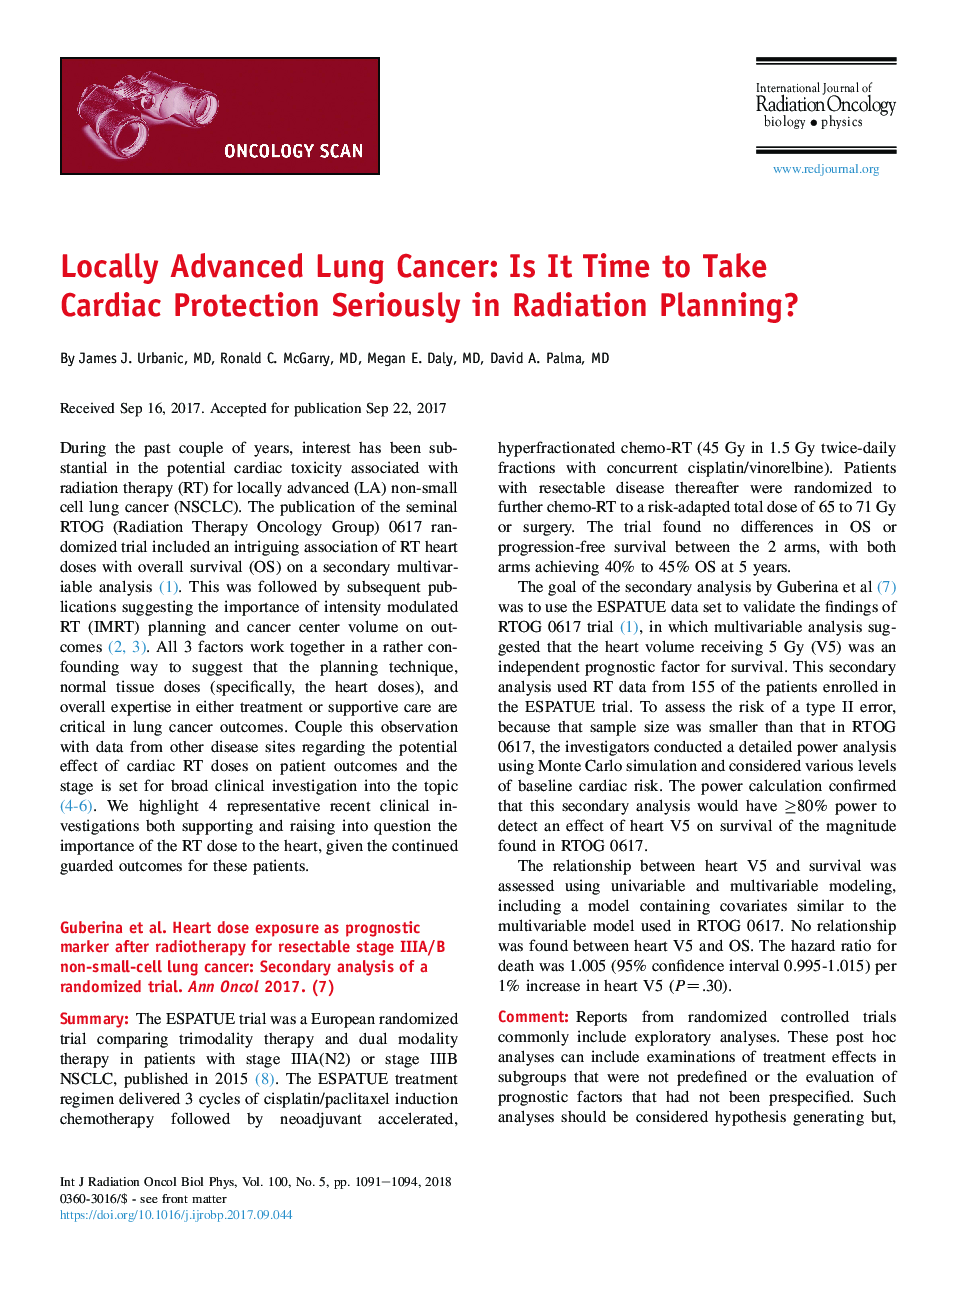 Locally Advanced Lung Cancer: Is It Time to Take Cardiac Protection Seriously in Radiation Planning?